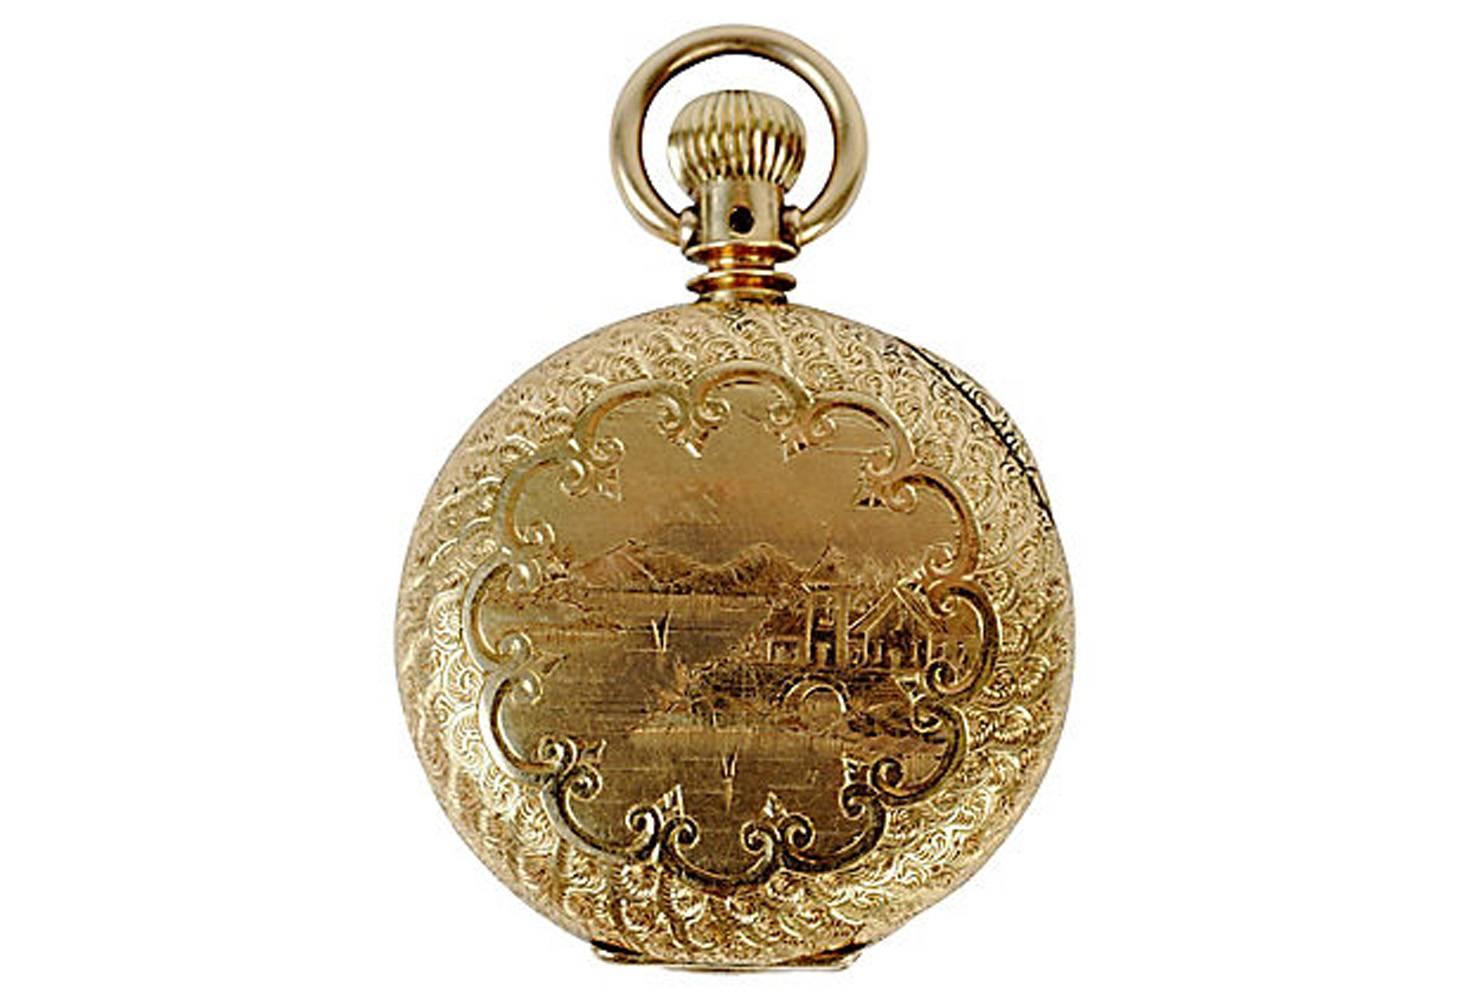 Elgin 14K gold triple hunter case pocket watch with fine chinoiserie decorated case. The back with engraved cartouche with initials. Roman numeral face and inset second hand and a lever set 15 jewel movement. Circa 1885 was 1/1000 made that year and